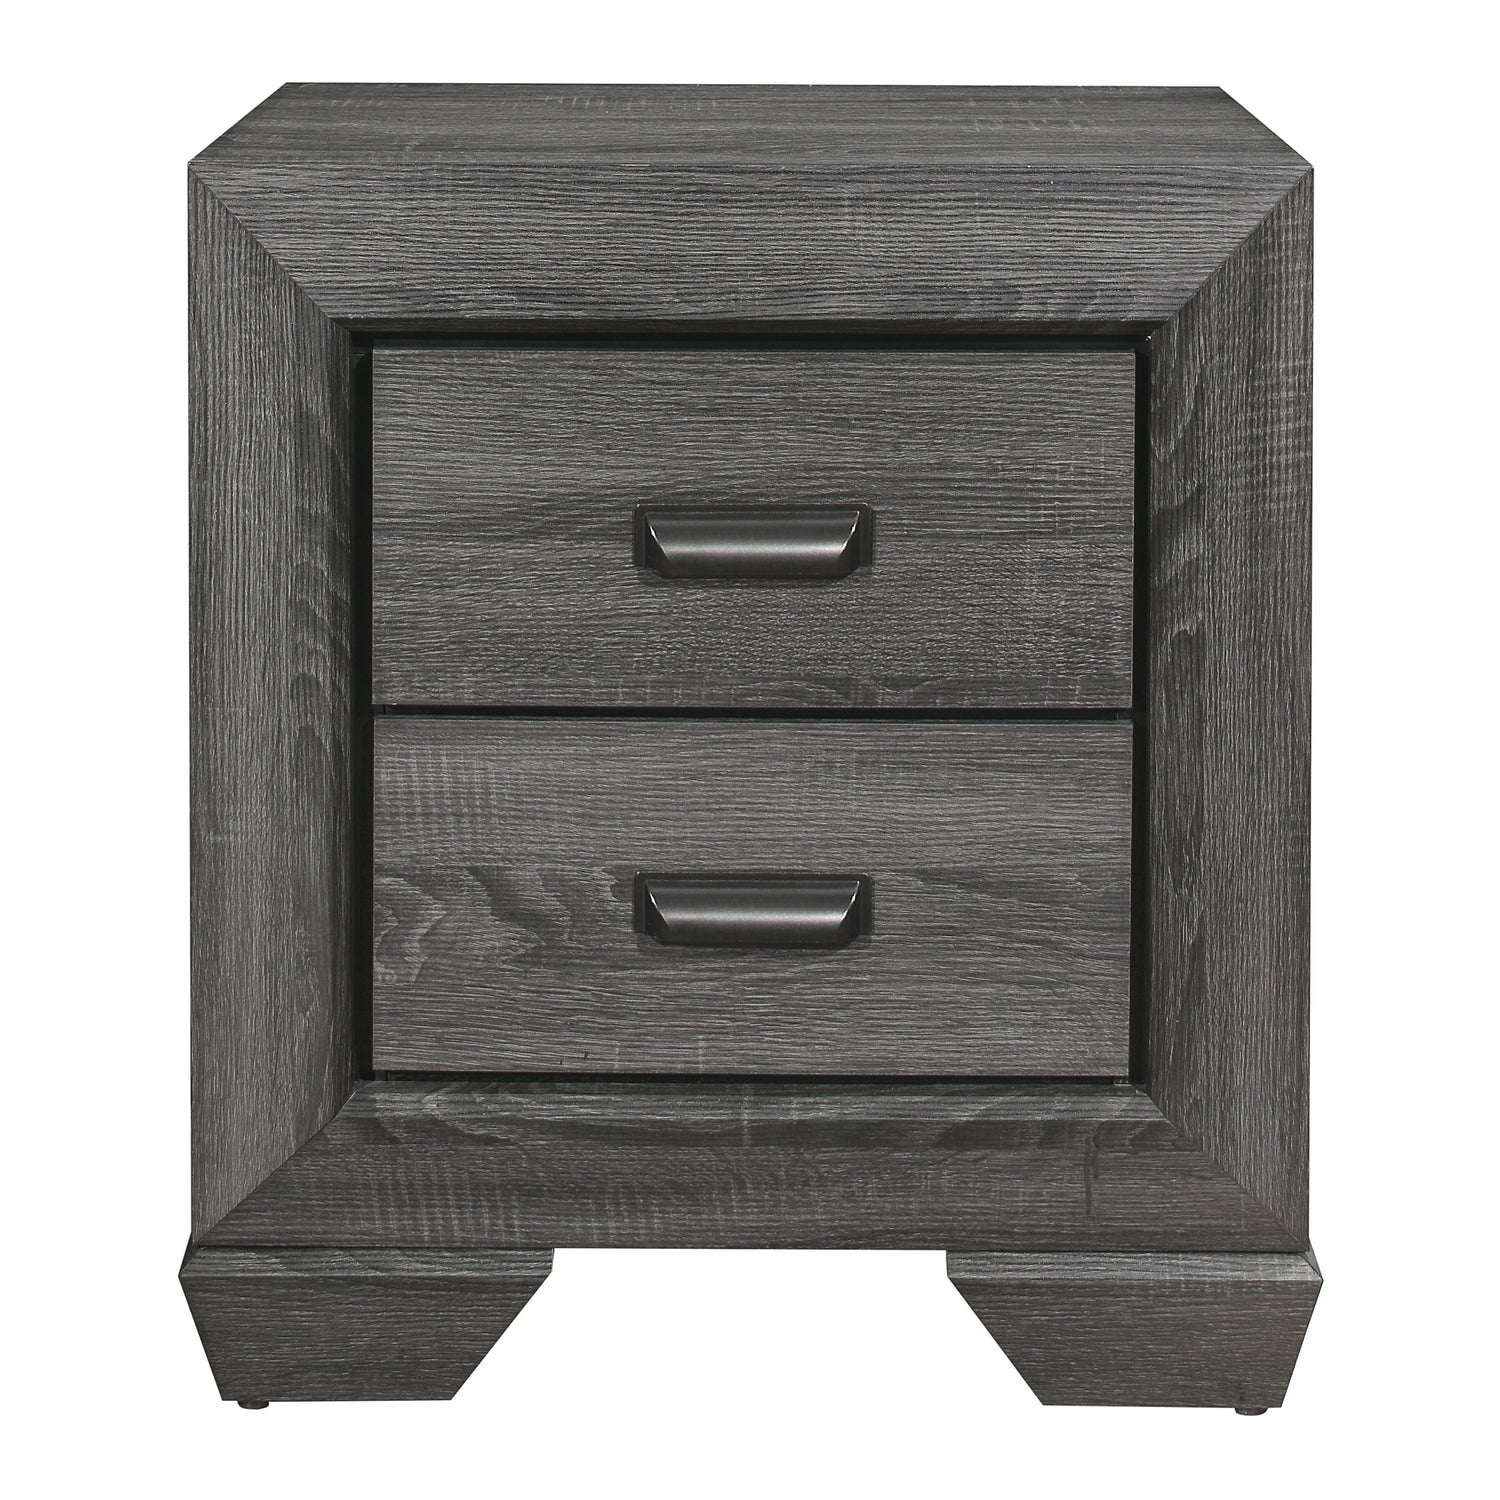 Beechnut Gray Panel Youth Bedroom Set - SET | 1904FGY-1 | 1904FGY-3 | 1904GY-5 | 1904GY-6 | 1904GY-4 | 1904GY-9 - Bien Home Furniture &amp; Electronics